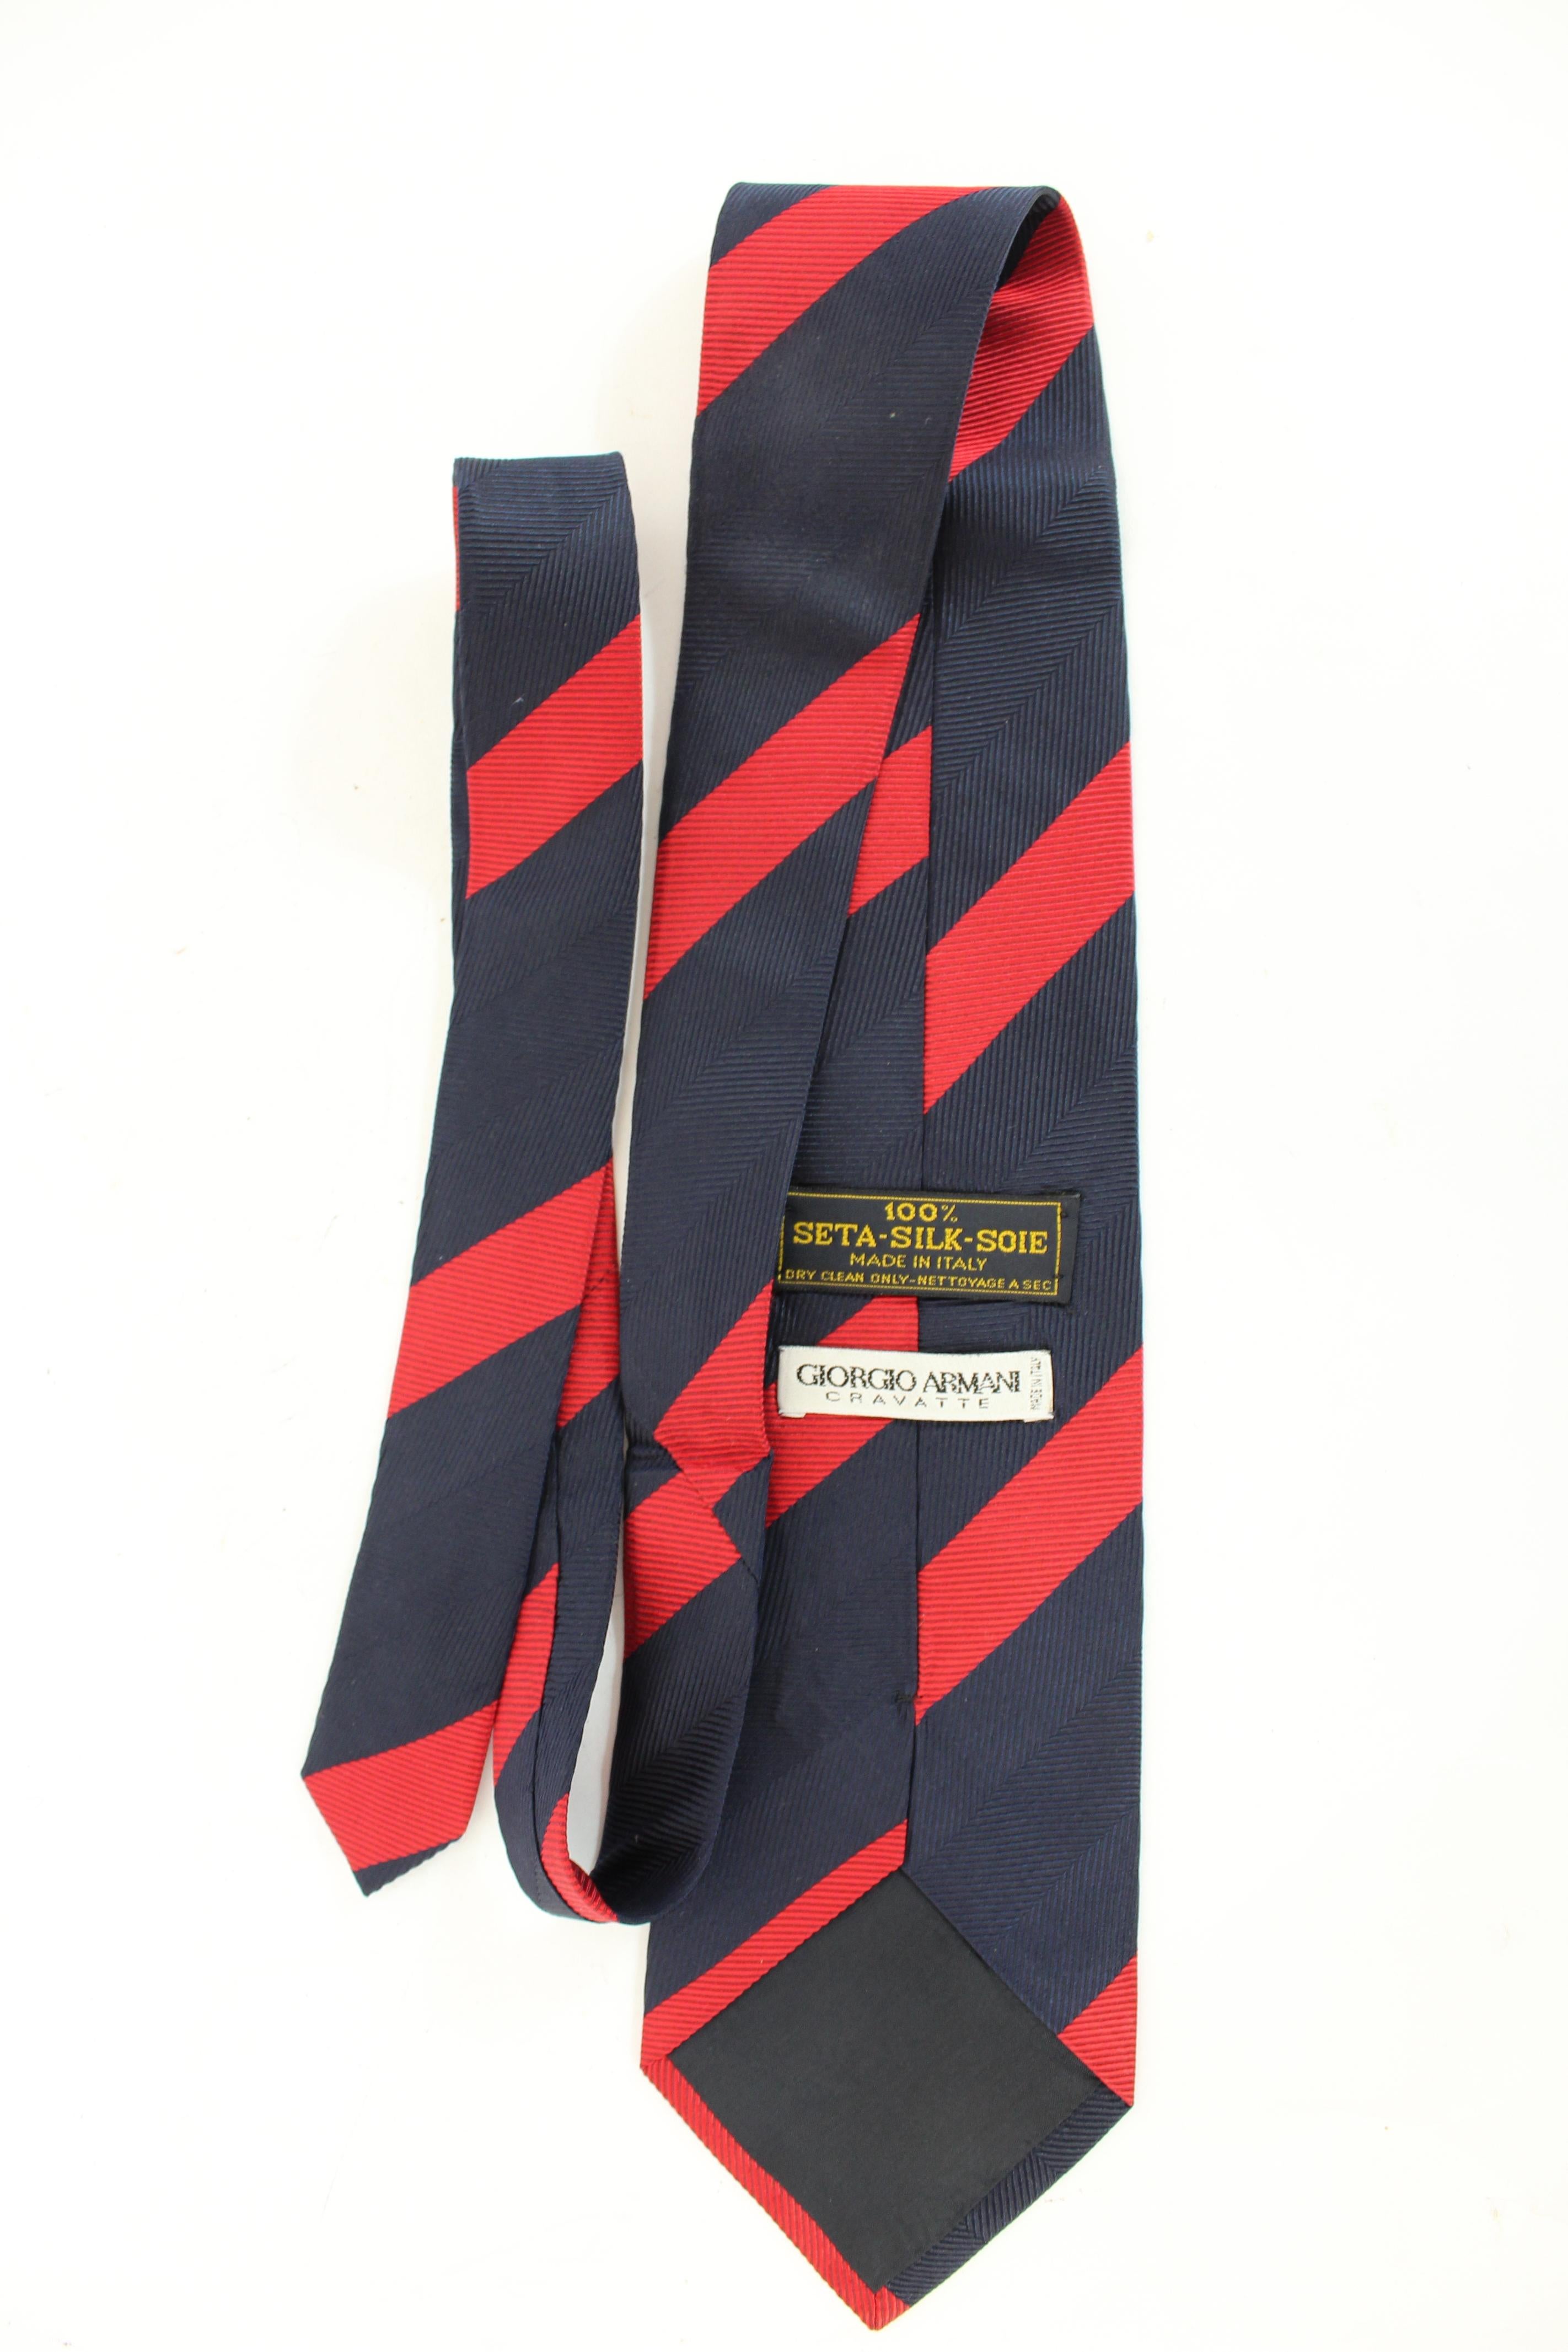 Giorgio Armani vintage 90s tie. Classic tie, regimental pattern. Blue and red color, 100% silk fabric. Made in Italy.

Condition: Excellent

Item used few times, it remains in its excellent condition. There are no visible signs of wear, and it is